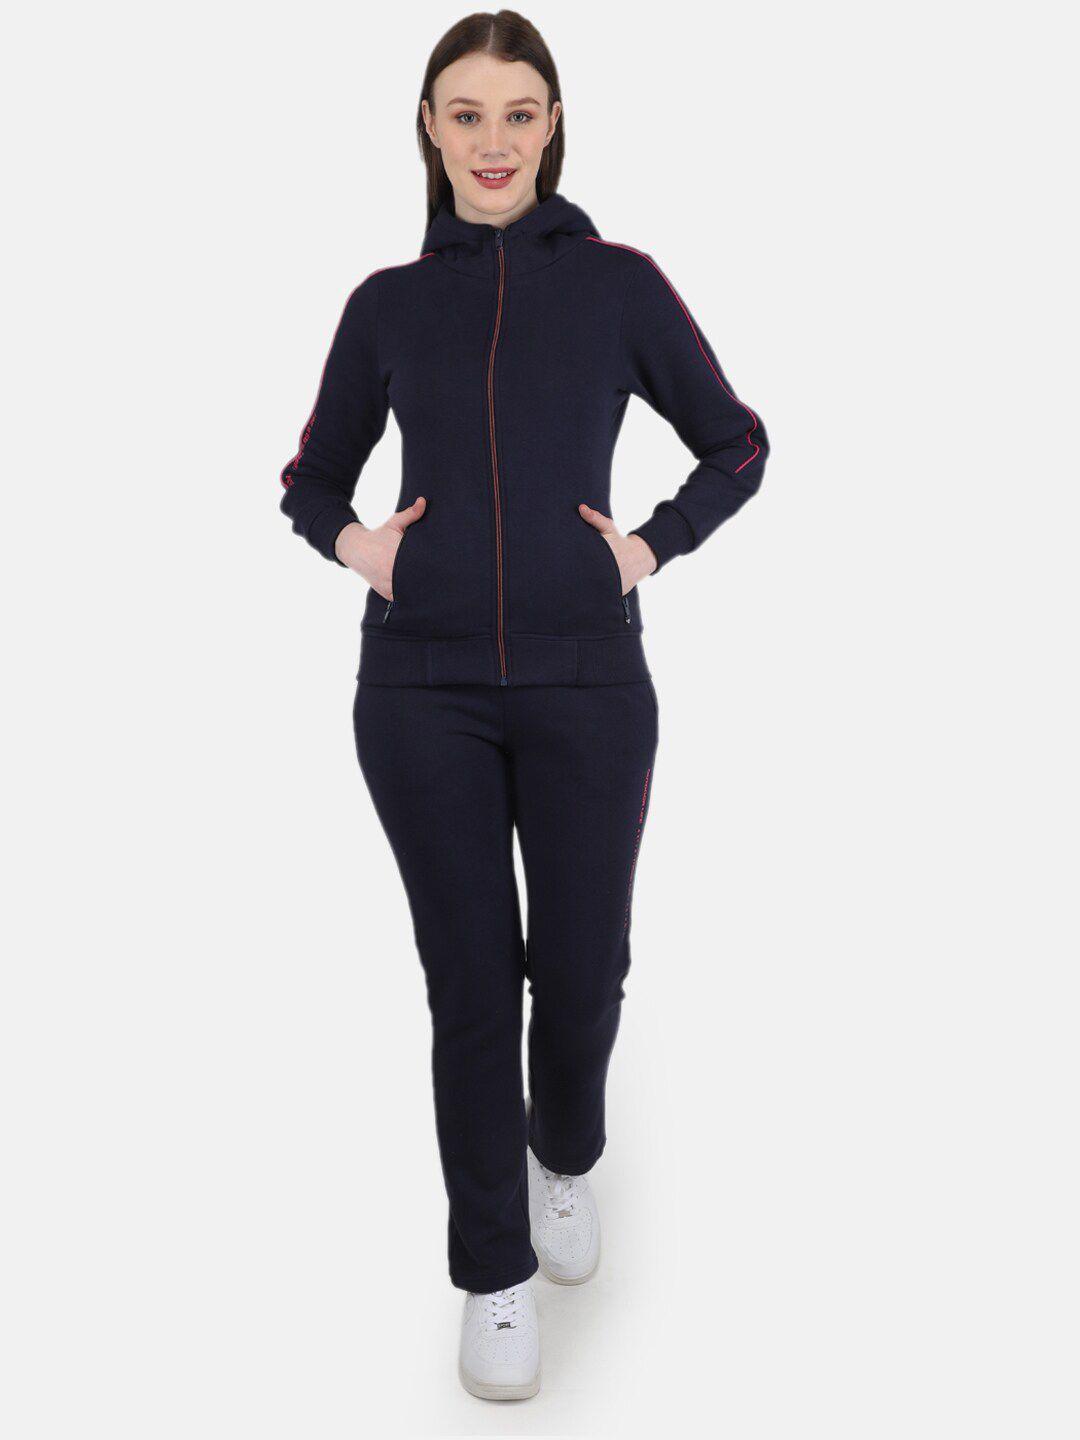 monte carlo women hooded neck tracksuits